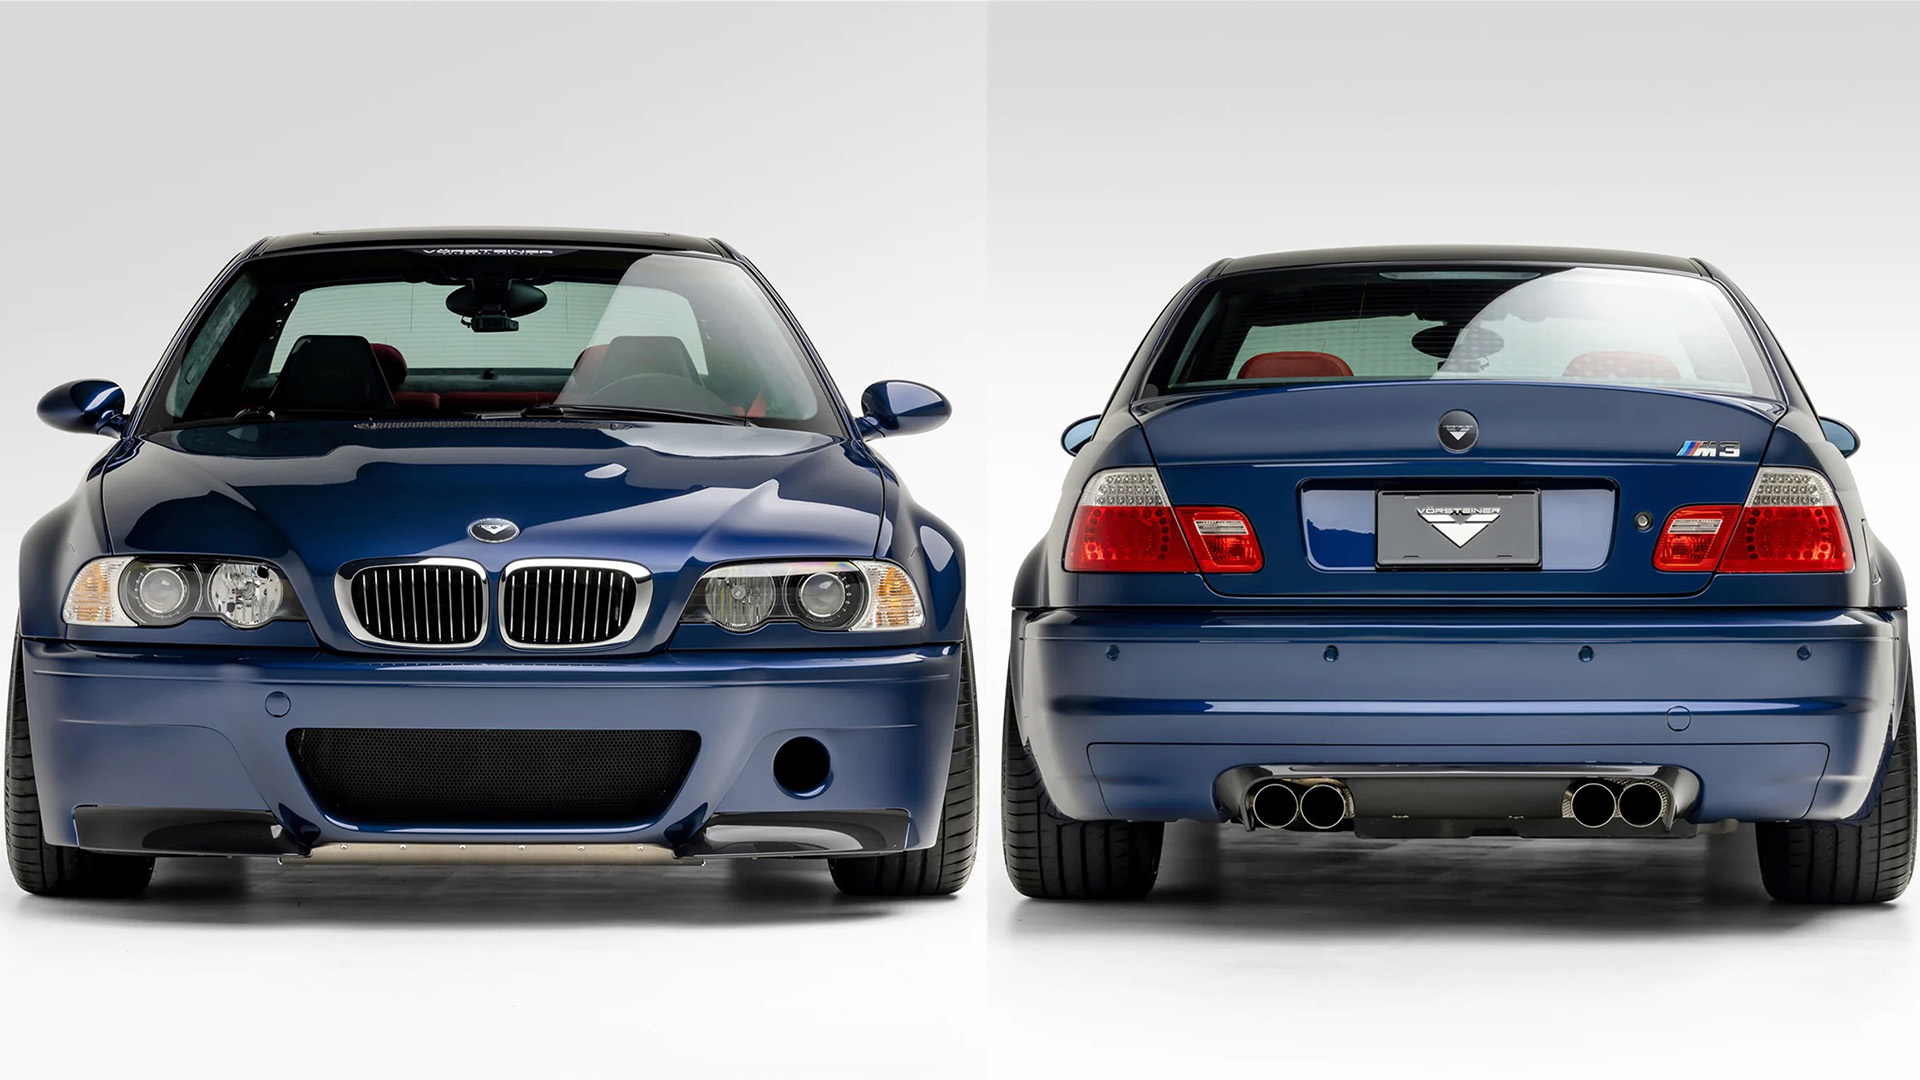 The E46 BMW M3 with Vorsteiner VCSL body components